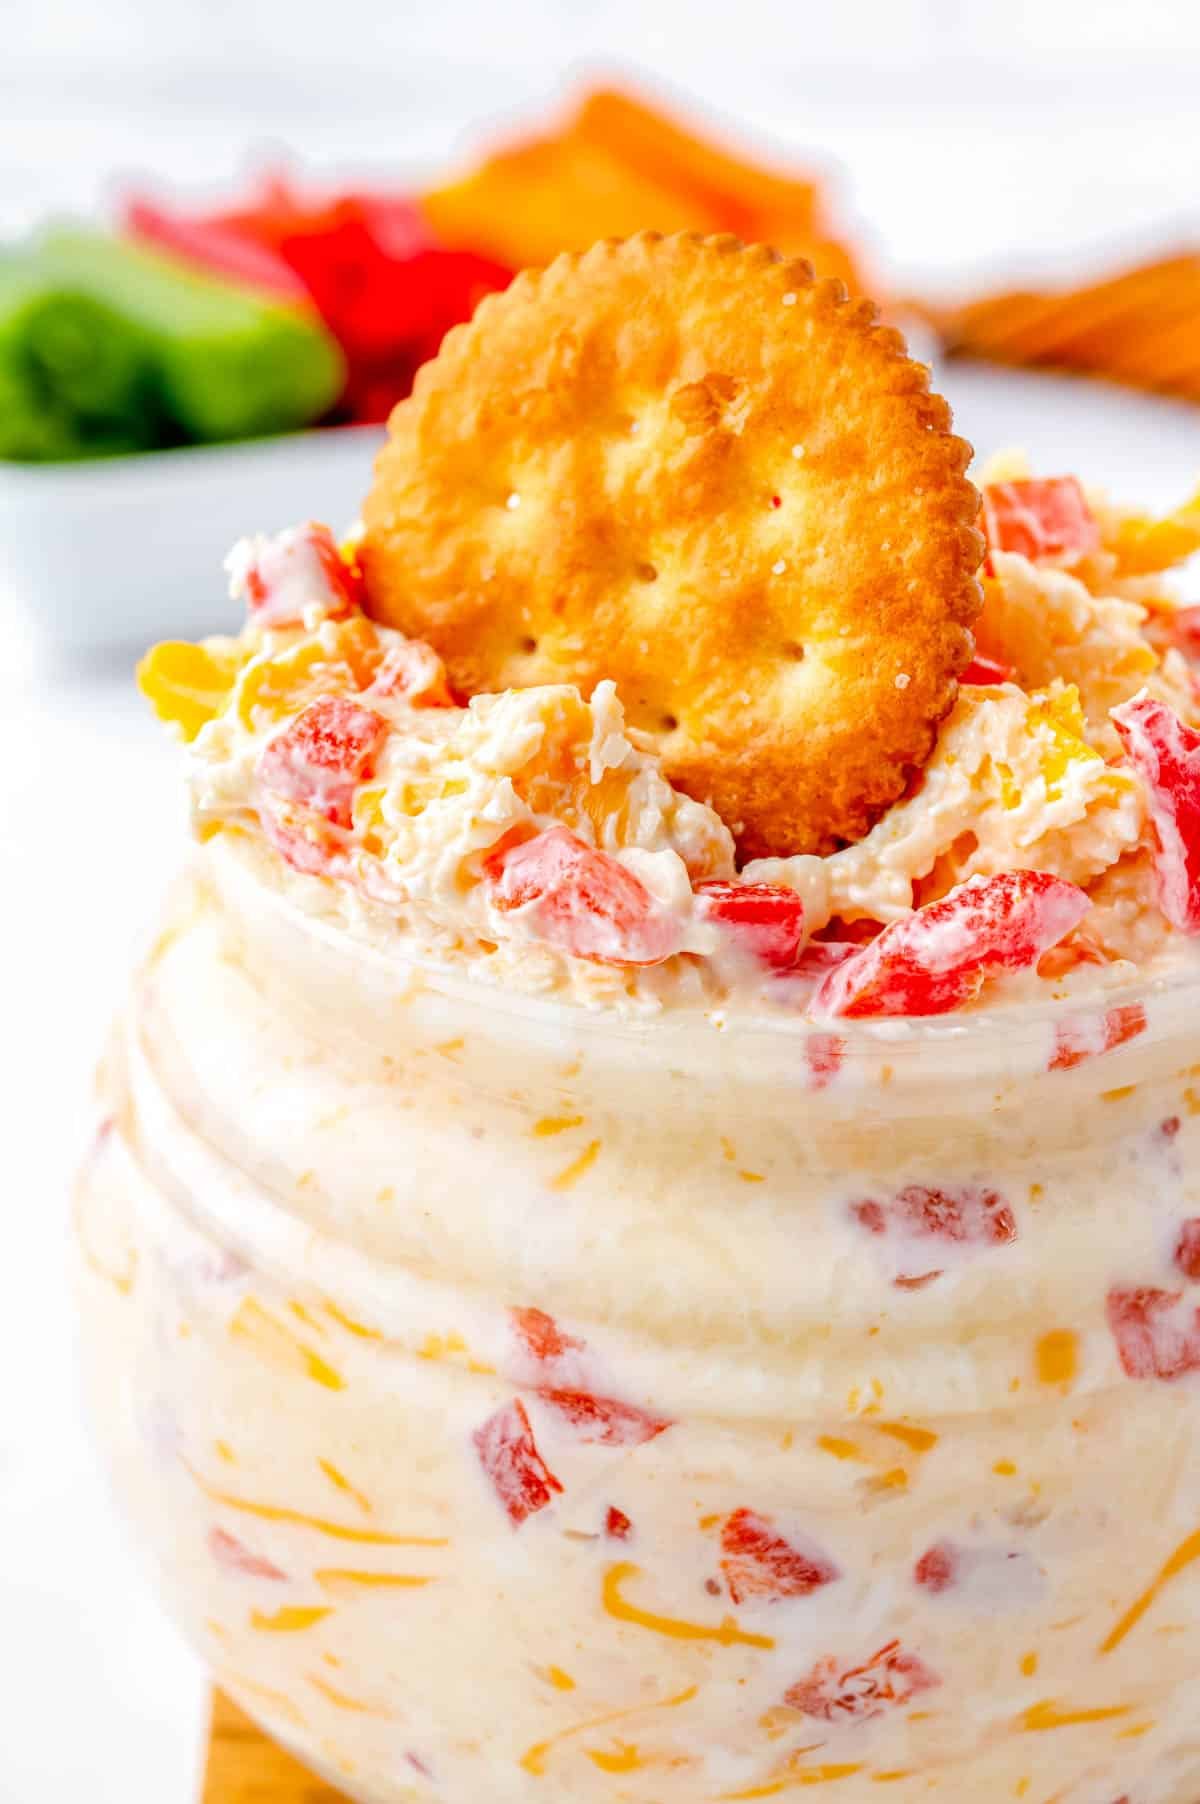 A close up picture of the Pimento Cheese in a serving jar and a cracker dipped into it.